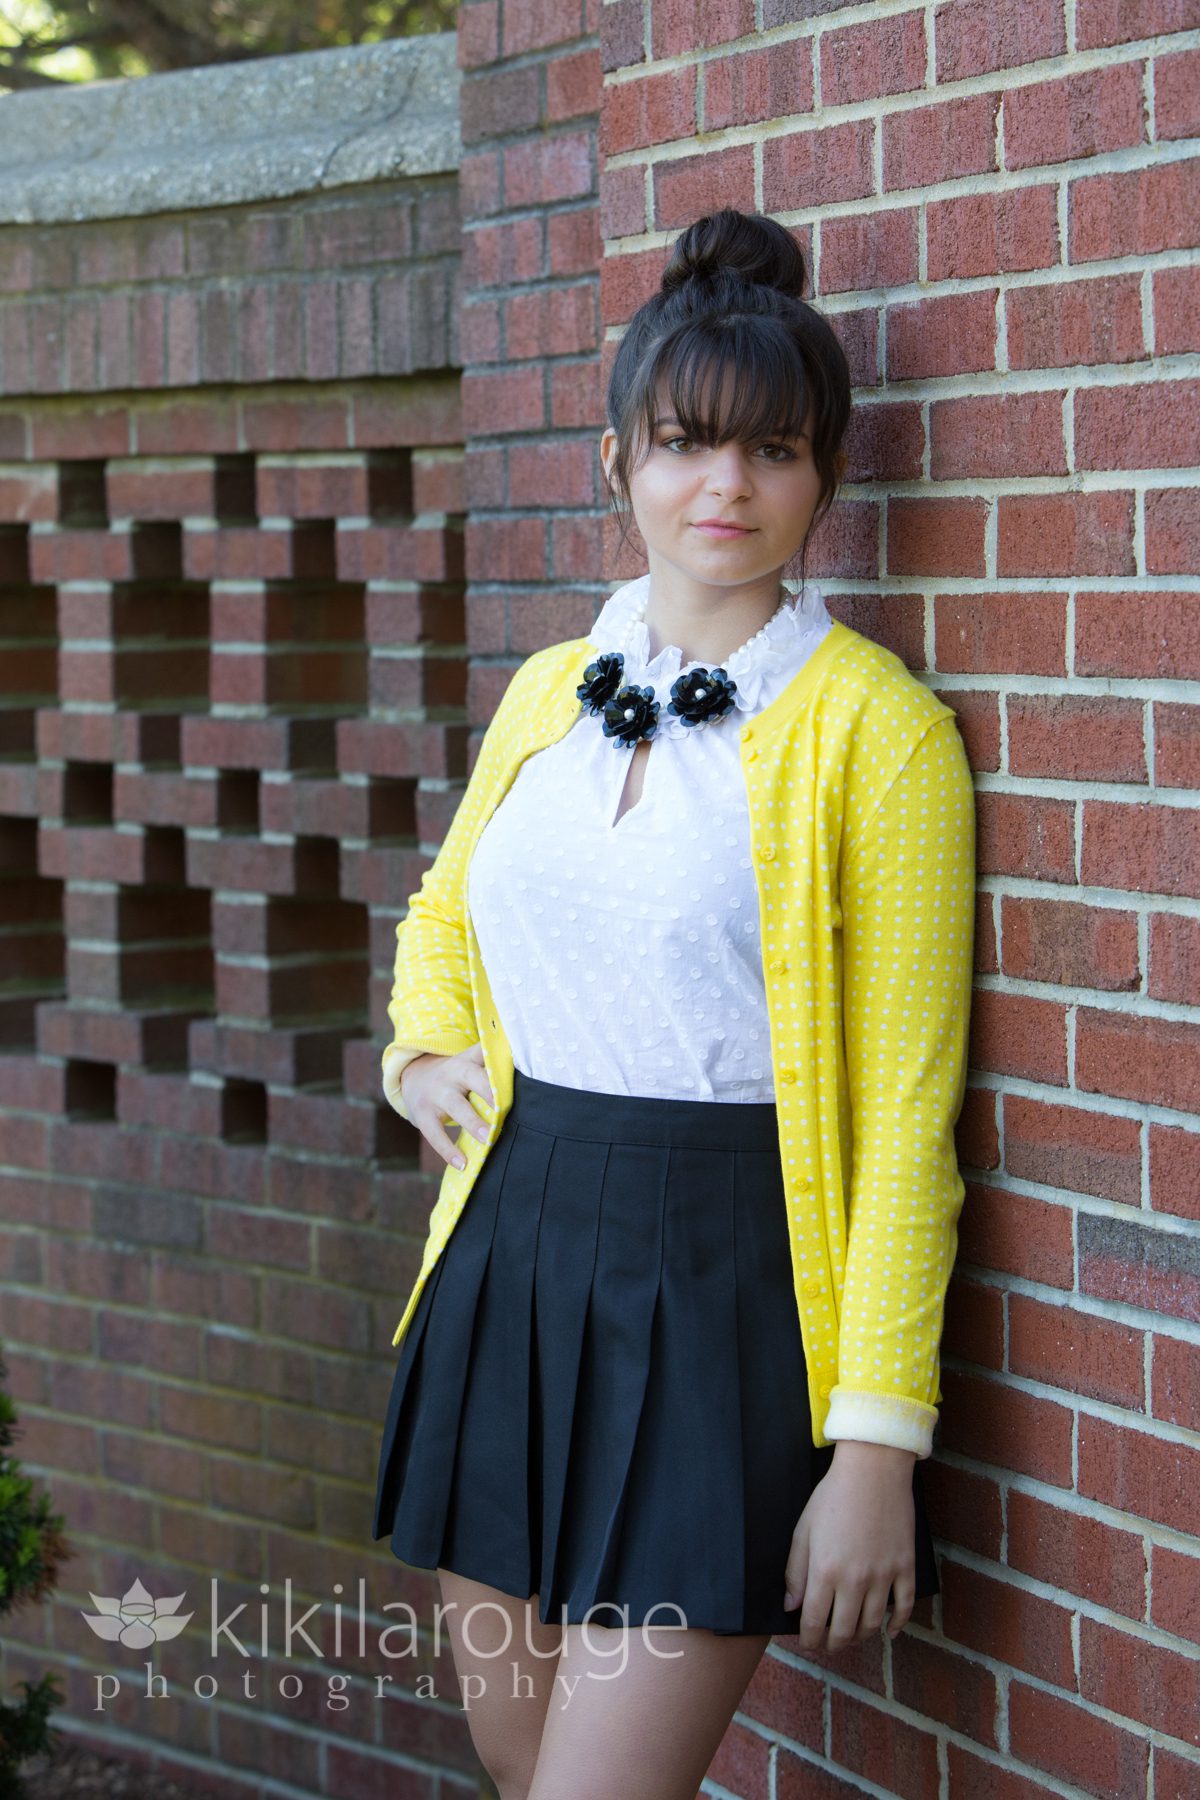 Senior with modeling preppy look in yellow sweater